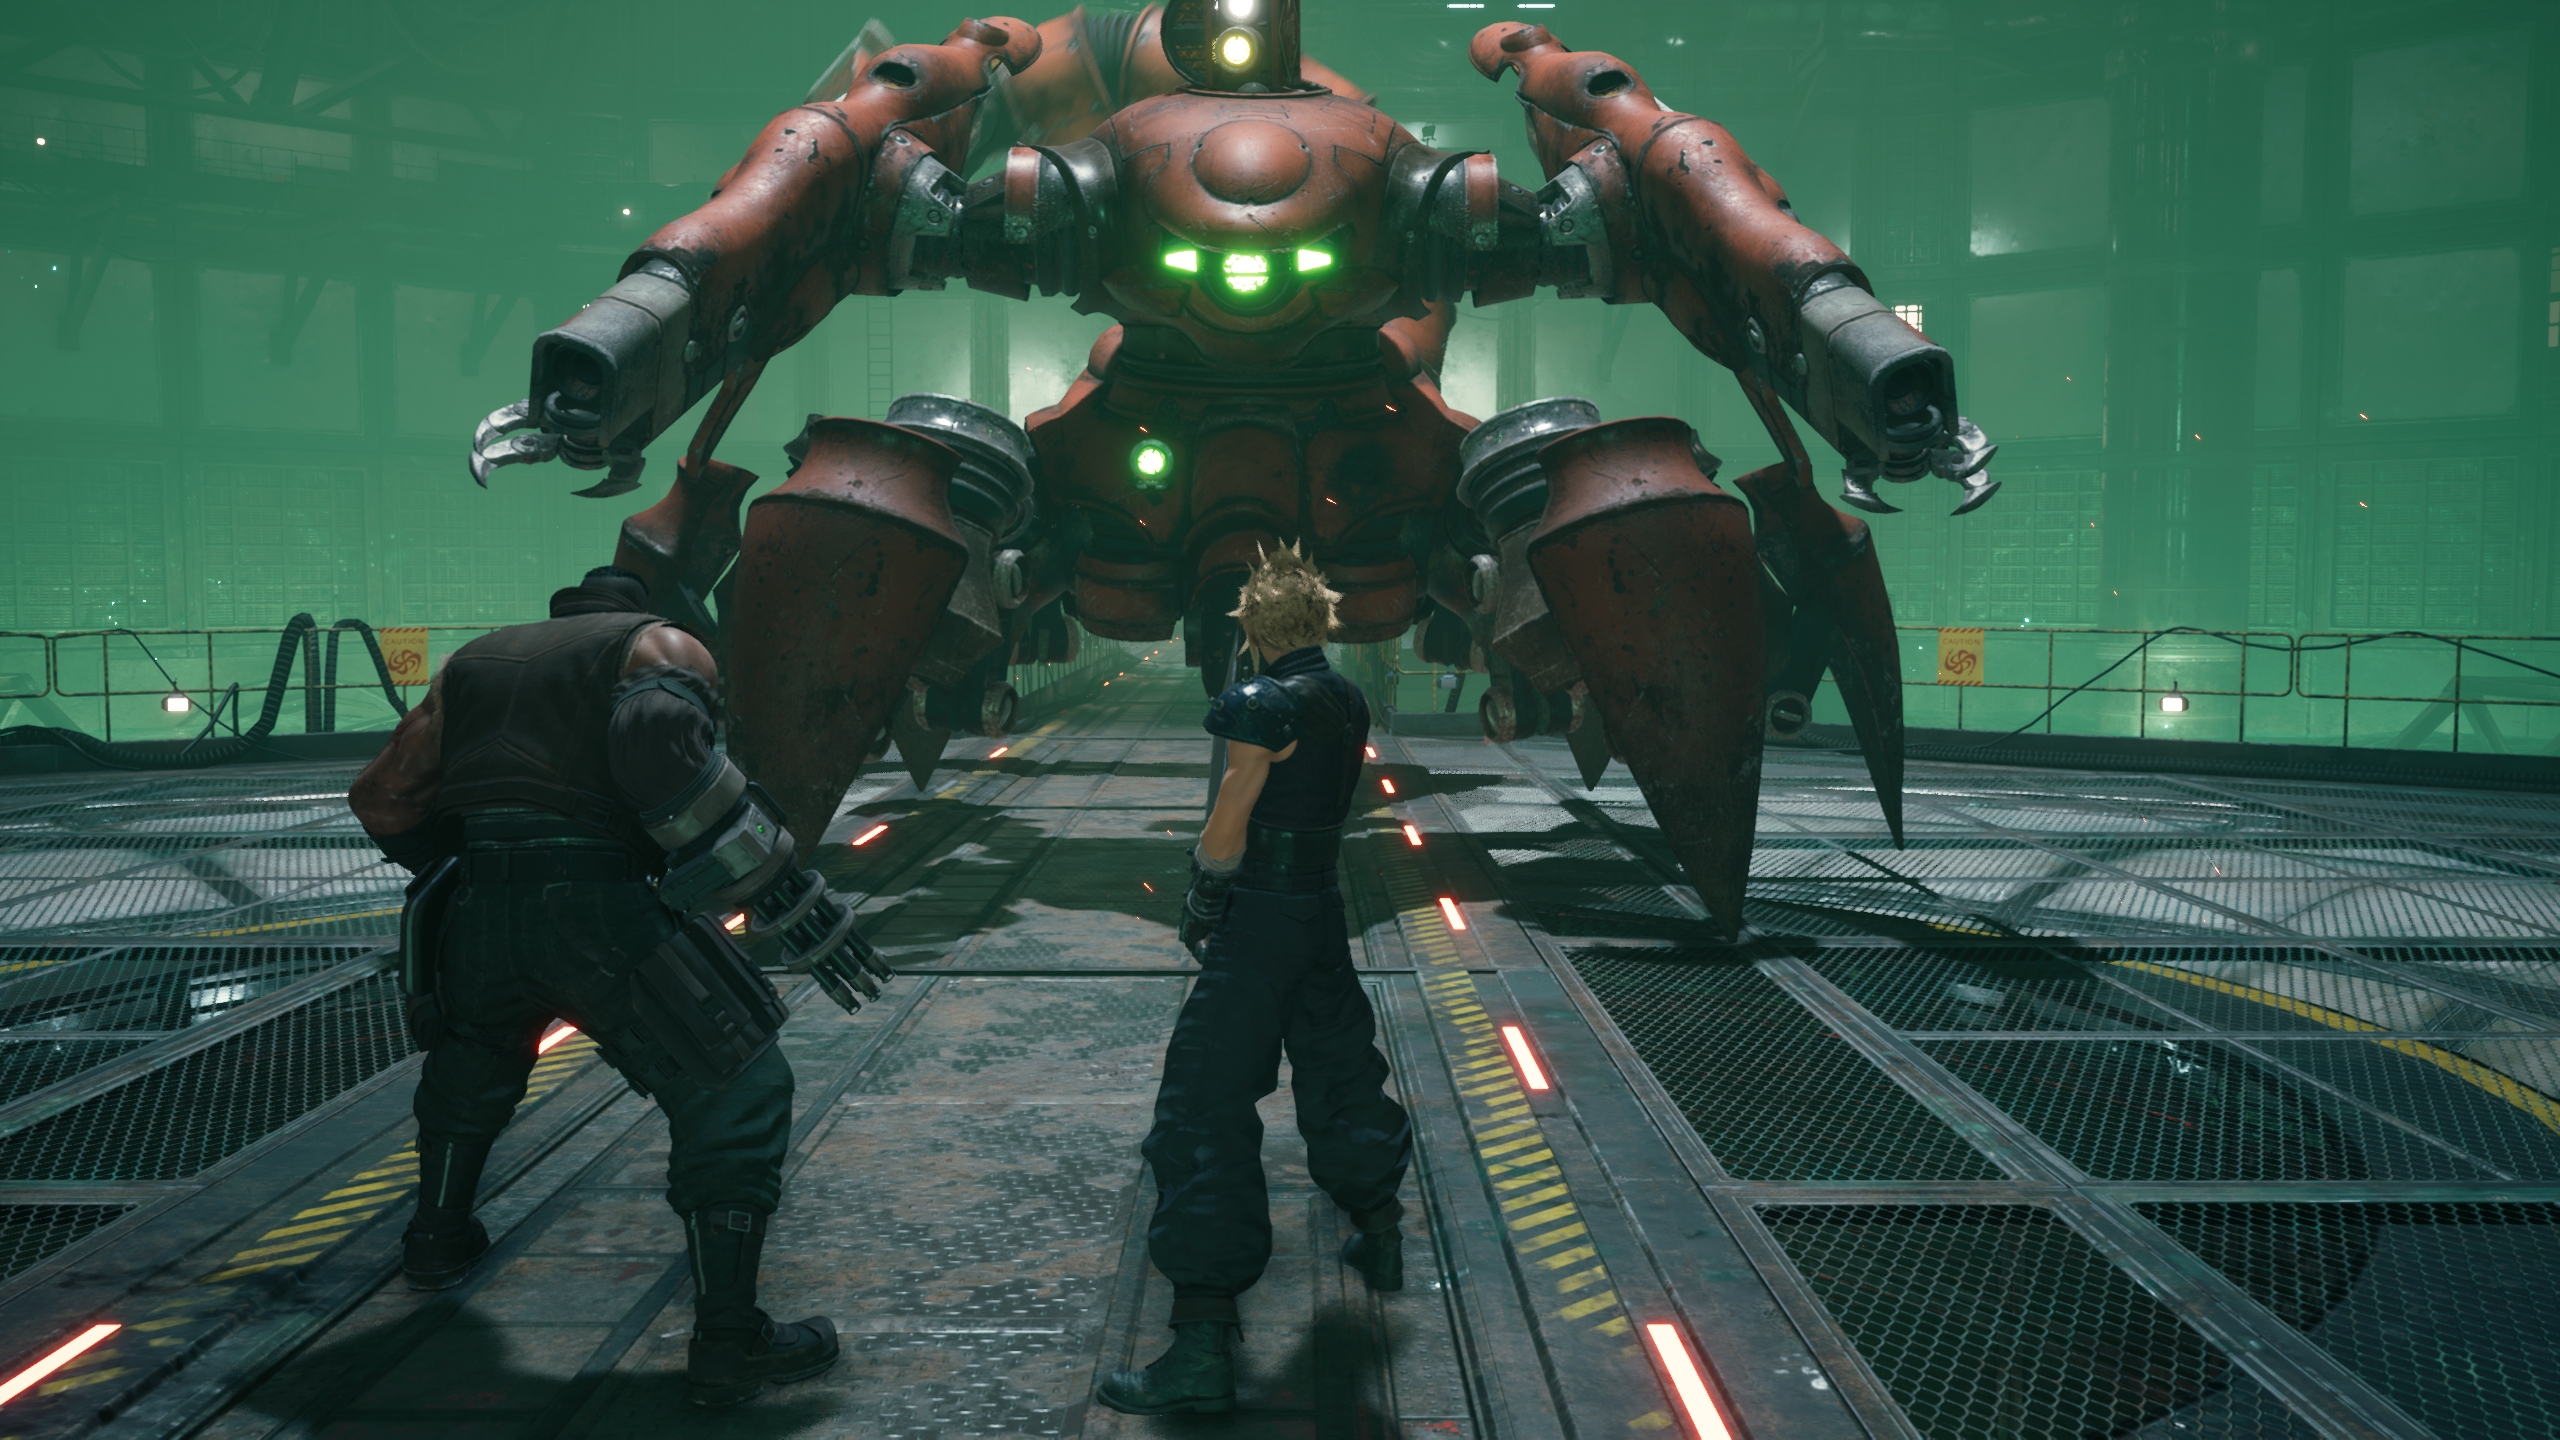 Cloud and Barret face a scorpion robot, remade